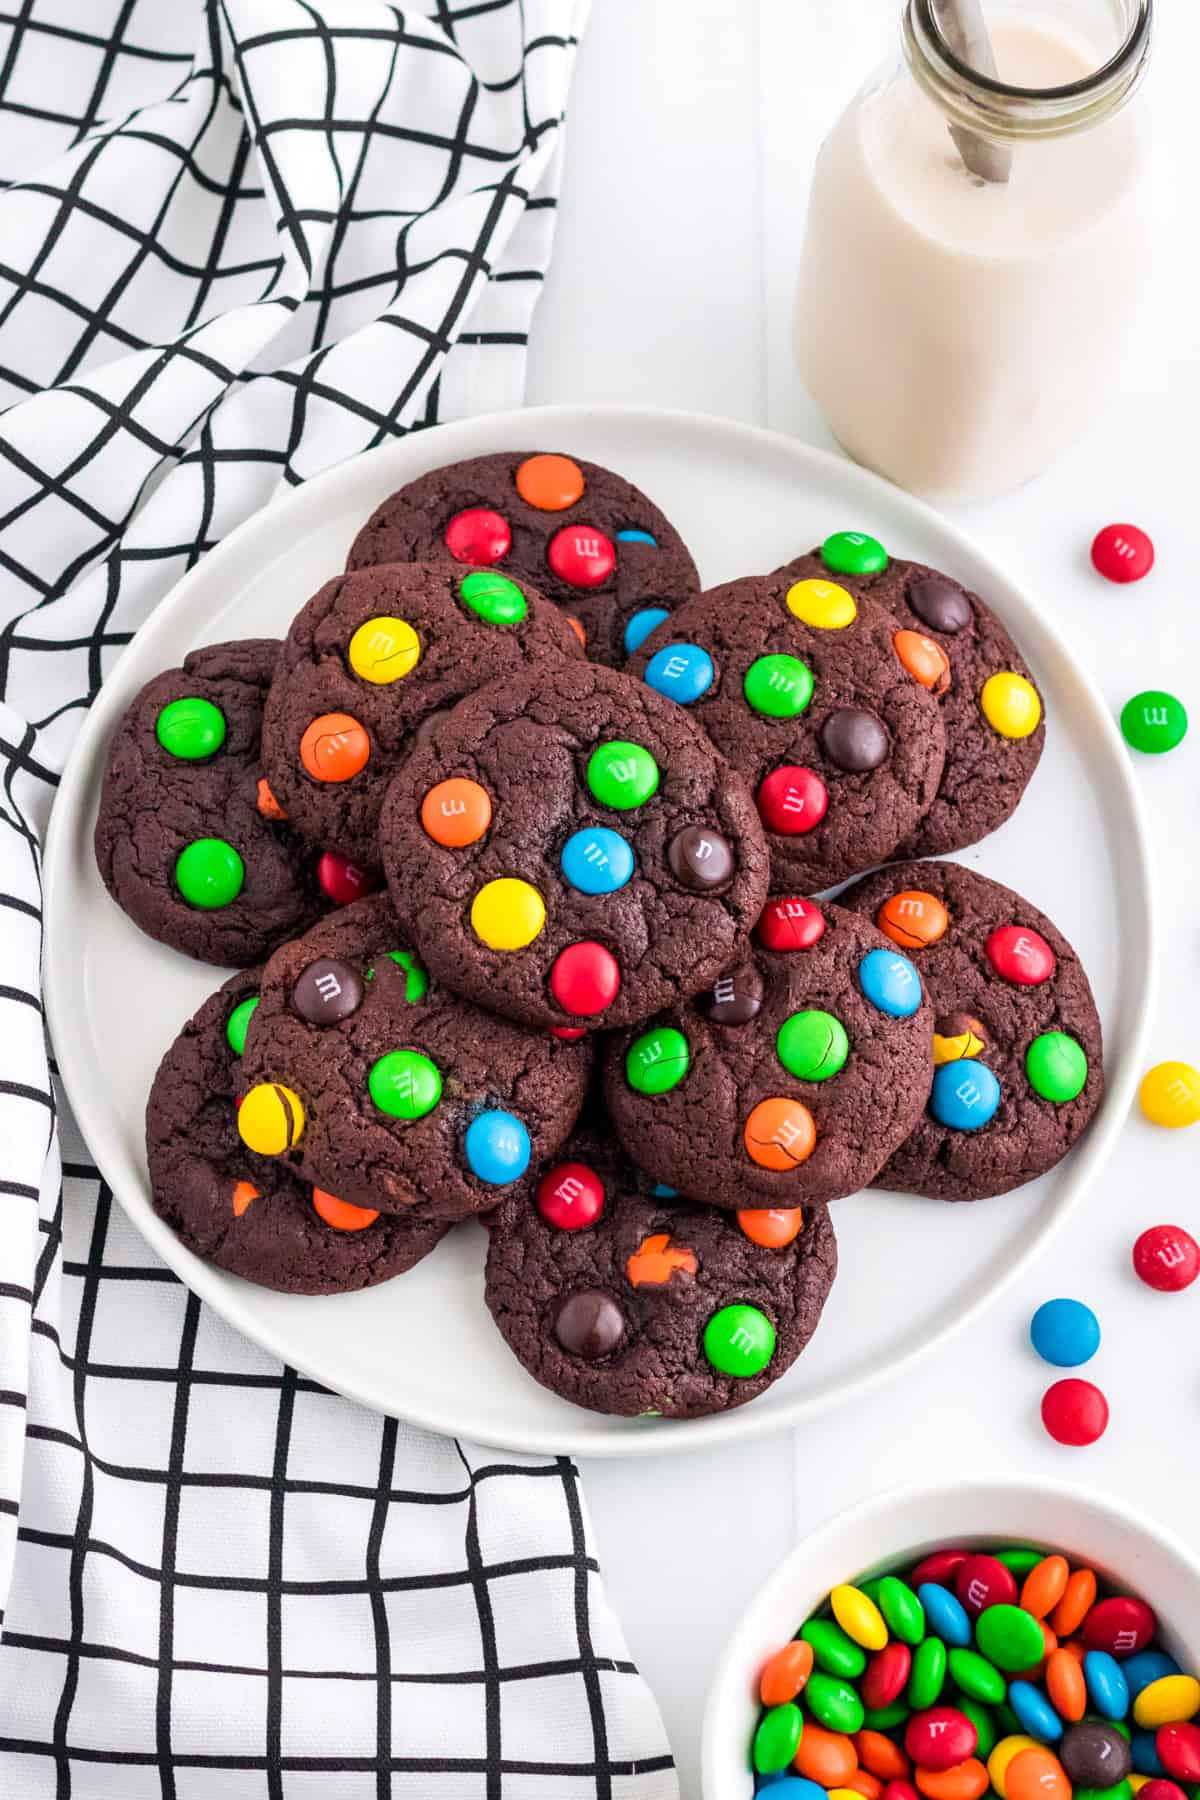 Chocolate cookies with M&Ms on white plate with glass of milk and more M&Ms next to them.